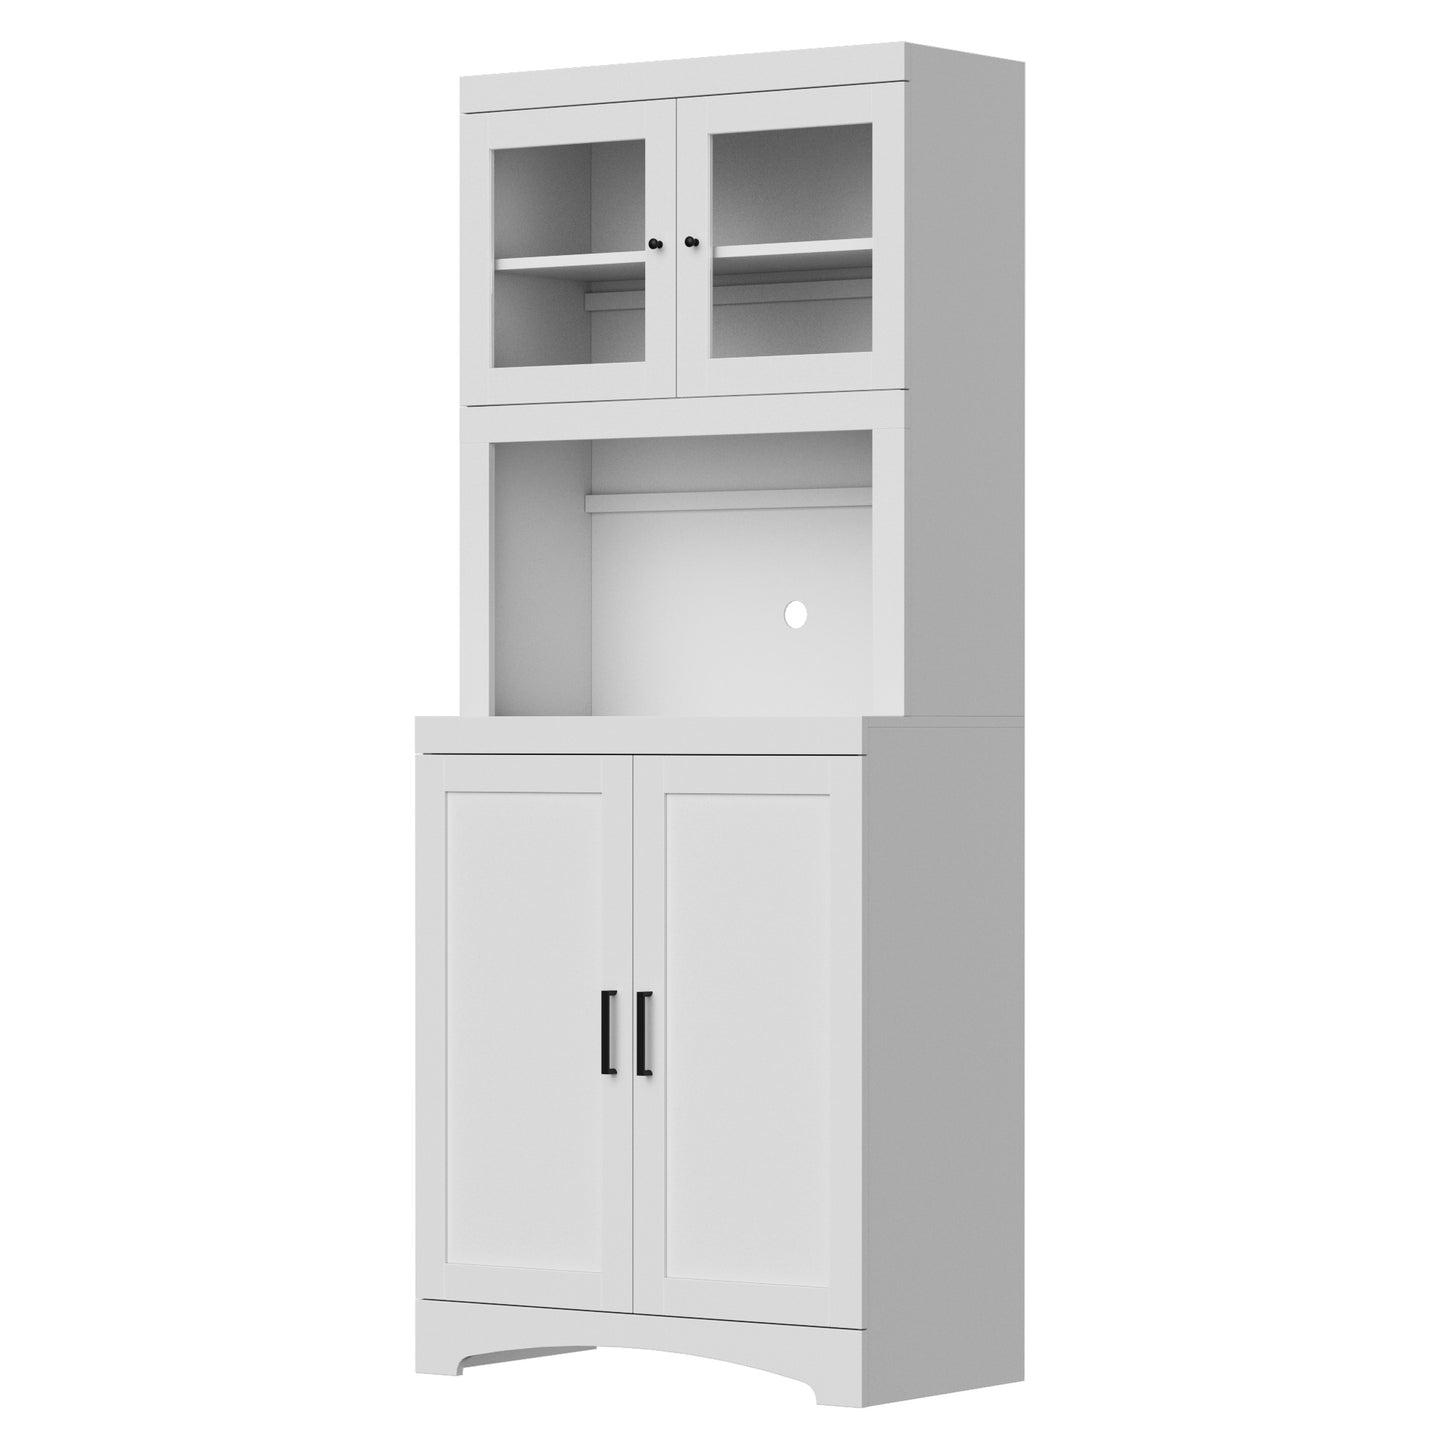 Cozy Castle White Kitchen Pantry, 70" Tall Kitchen Pantry Cabinet with Doors and Adjustable Shelves, Microwave Storage Cabinet for Home, Office